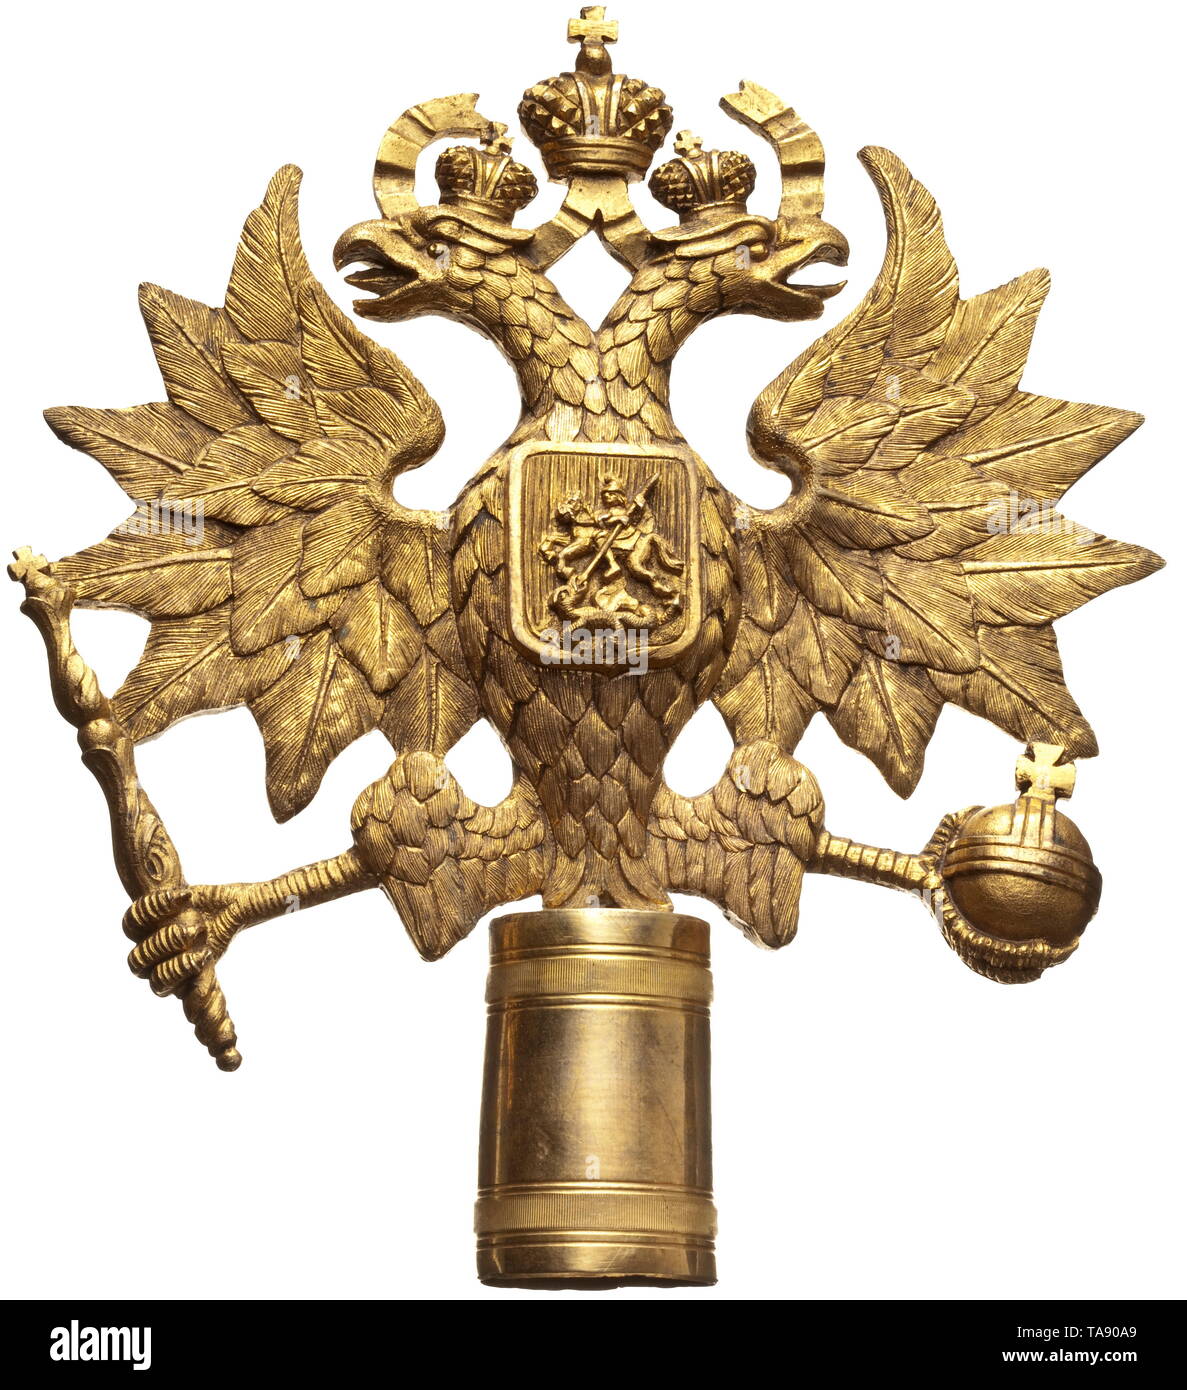 A Russian double-headed eagle top, probably for the tsar's pages, circa 1900 Gilded bronze. Delicately chased and engraved Russian double-headed eagle on the front. Height 18 cm. Good, used condition. Rare. historic, historical, 20th century, Additional-Rights-Clearance-Info-Not-Available Stock Photo